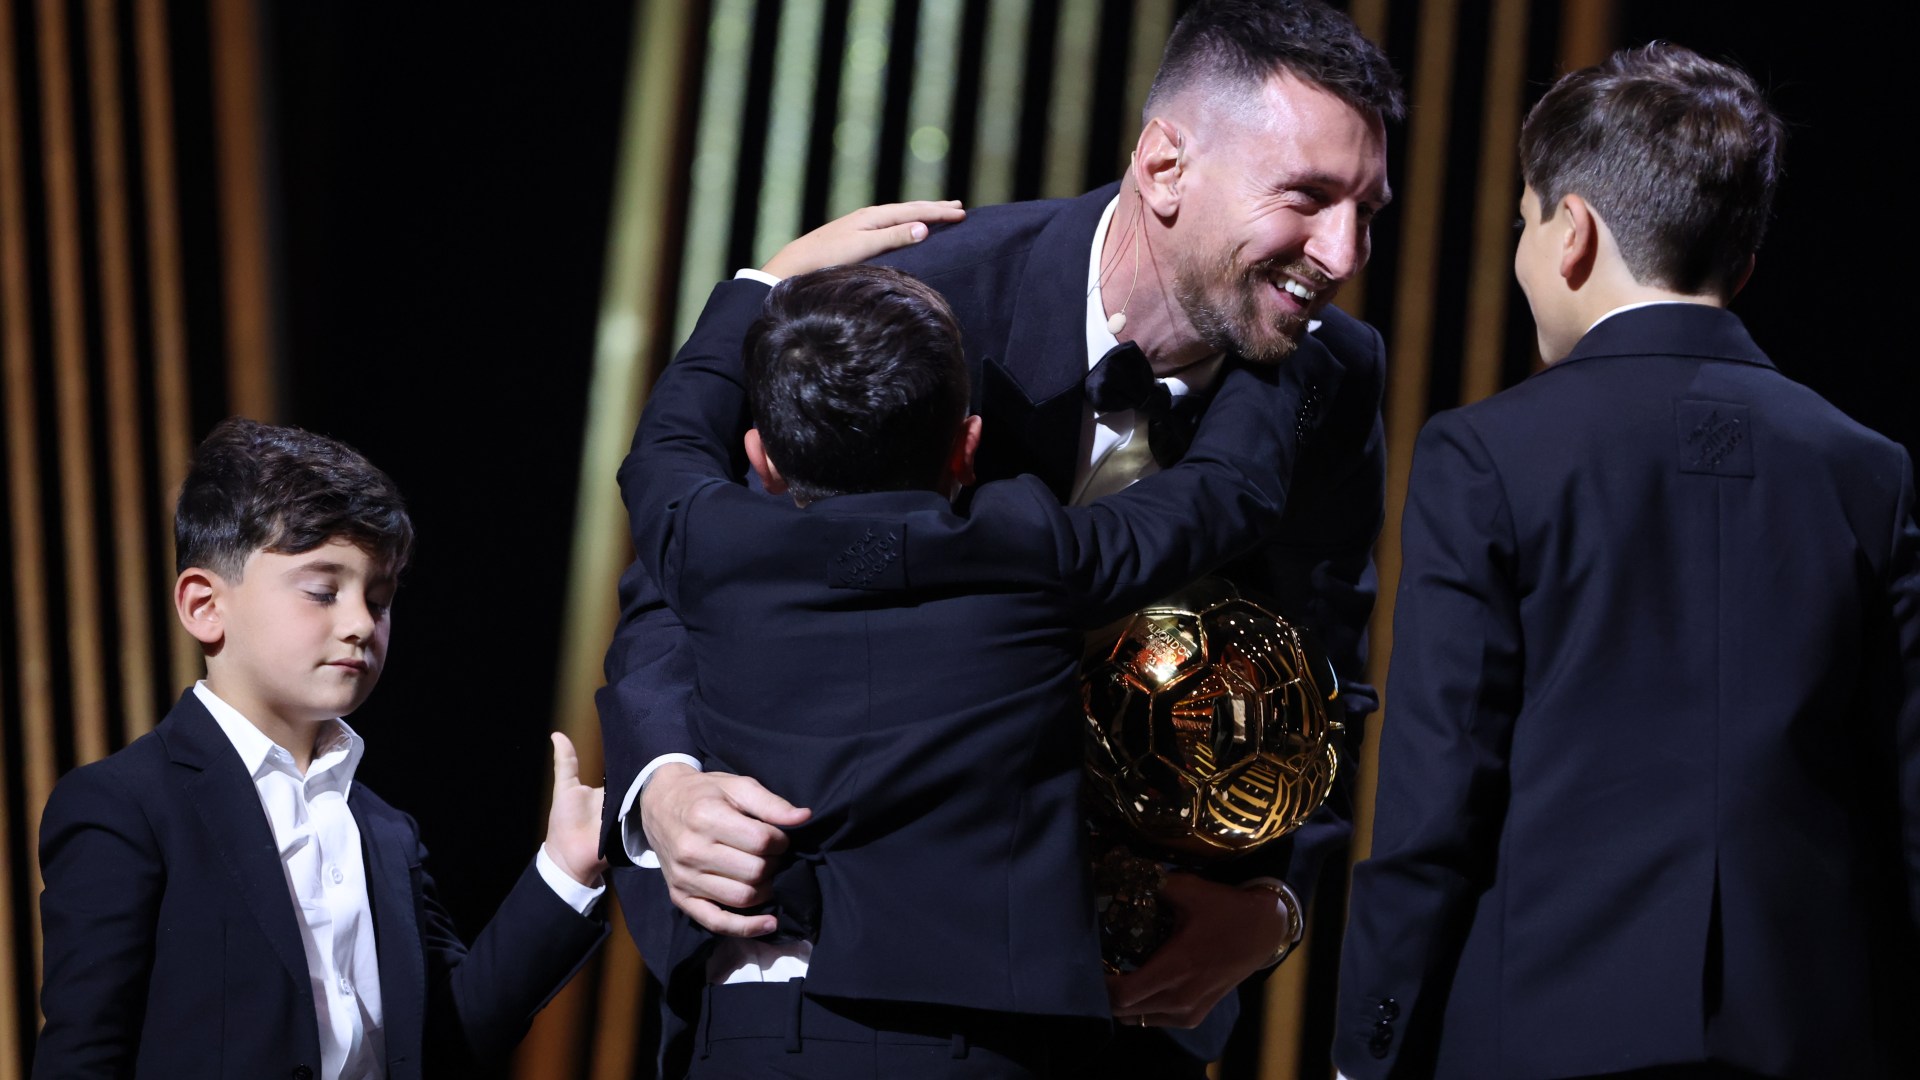 Lionel Messi joined by his sons on stage and wishes Diego Maradona happy birthday in touching Ballon d'Or speech